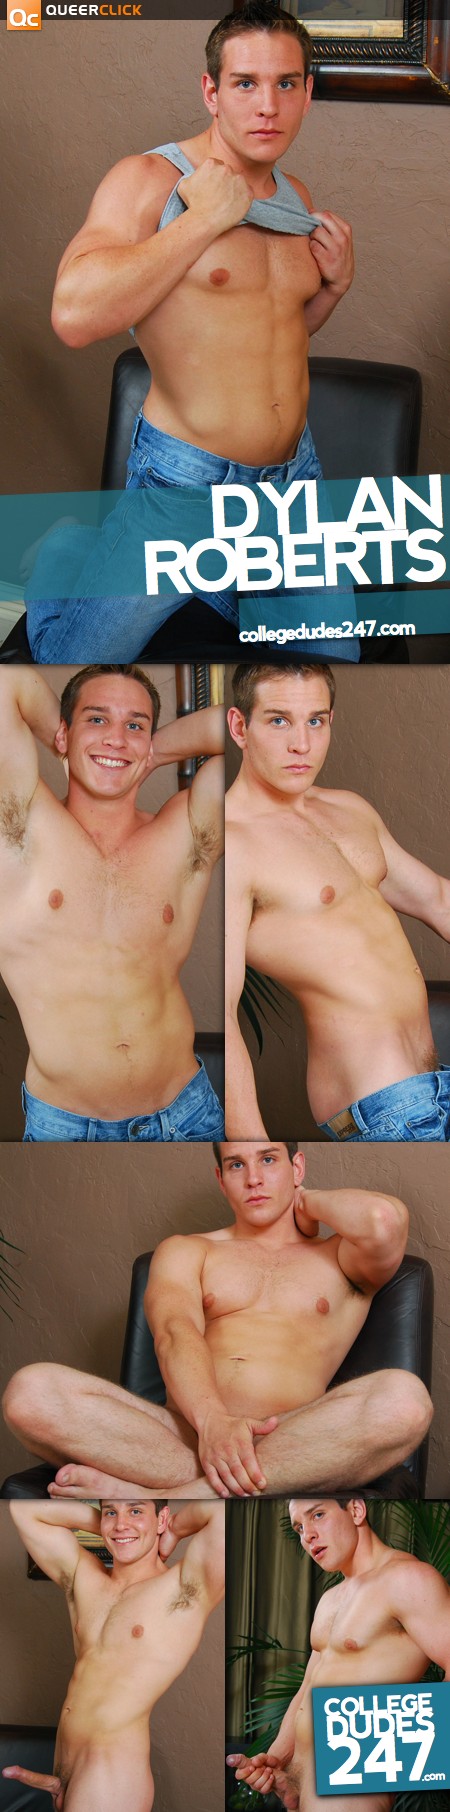 College Dudes 24/7: Dylan Roberts